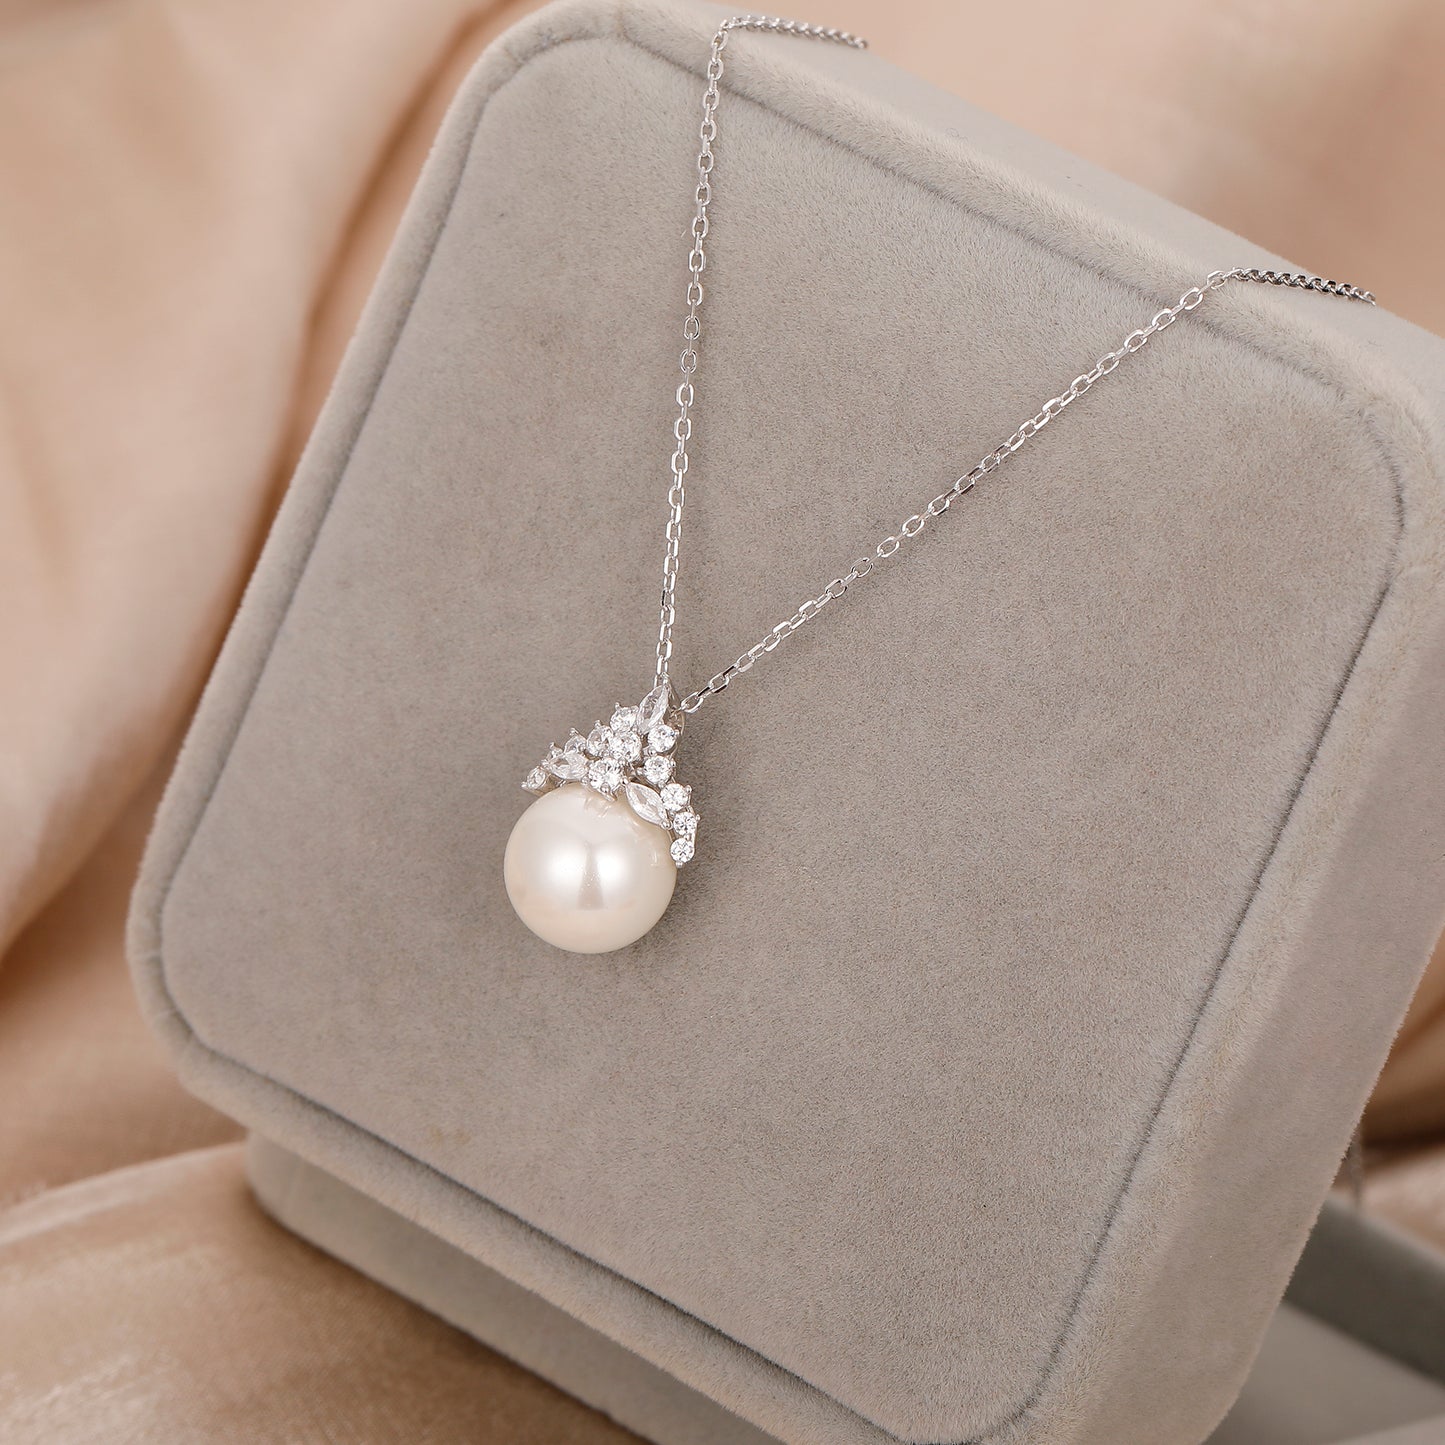 Sterling Silver Necklace, 12mm Round Natural Shell Pearl Necklace, Simulated Diamond Jewelry, Birthday Gifts